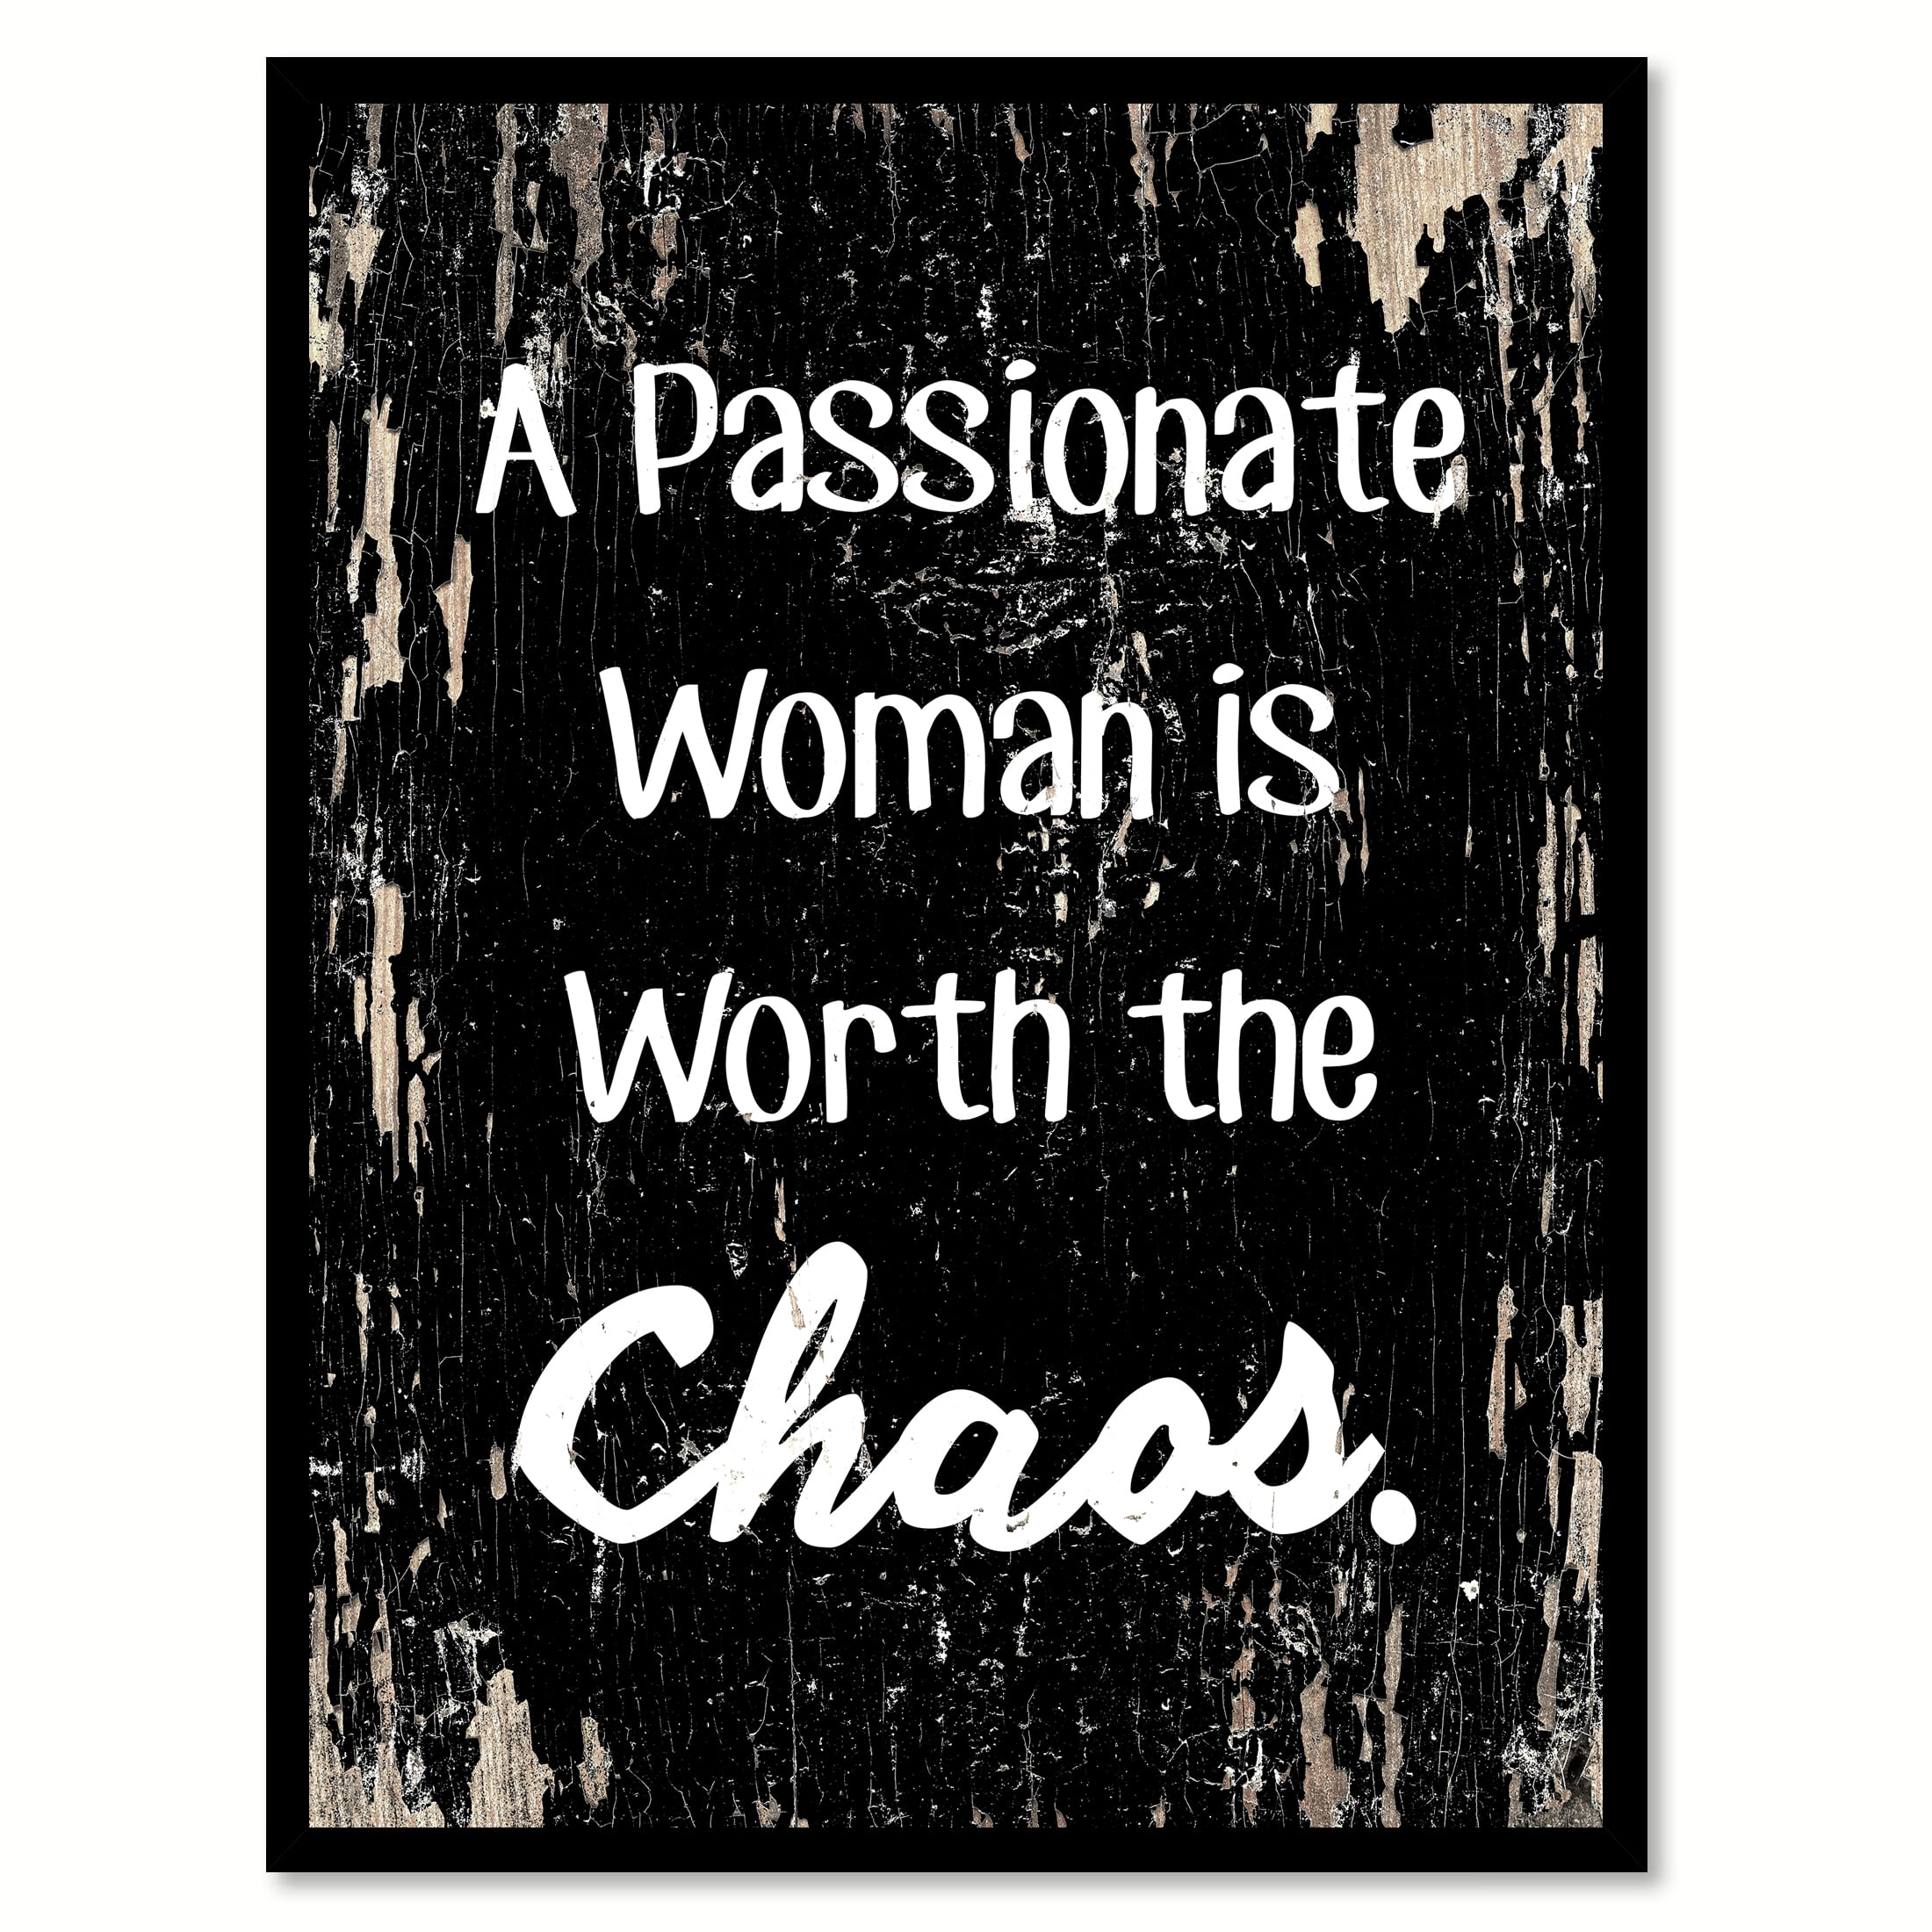 A passionate woman is worth the chaos